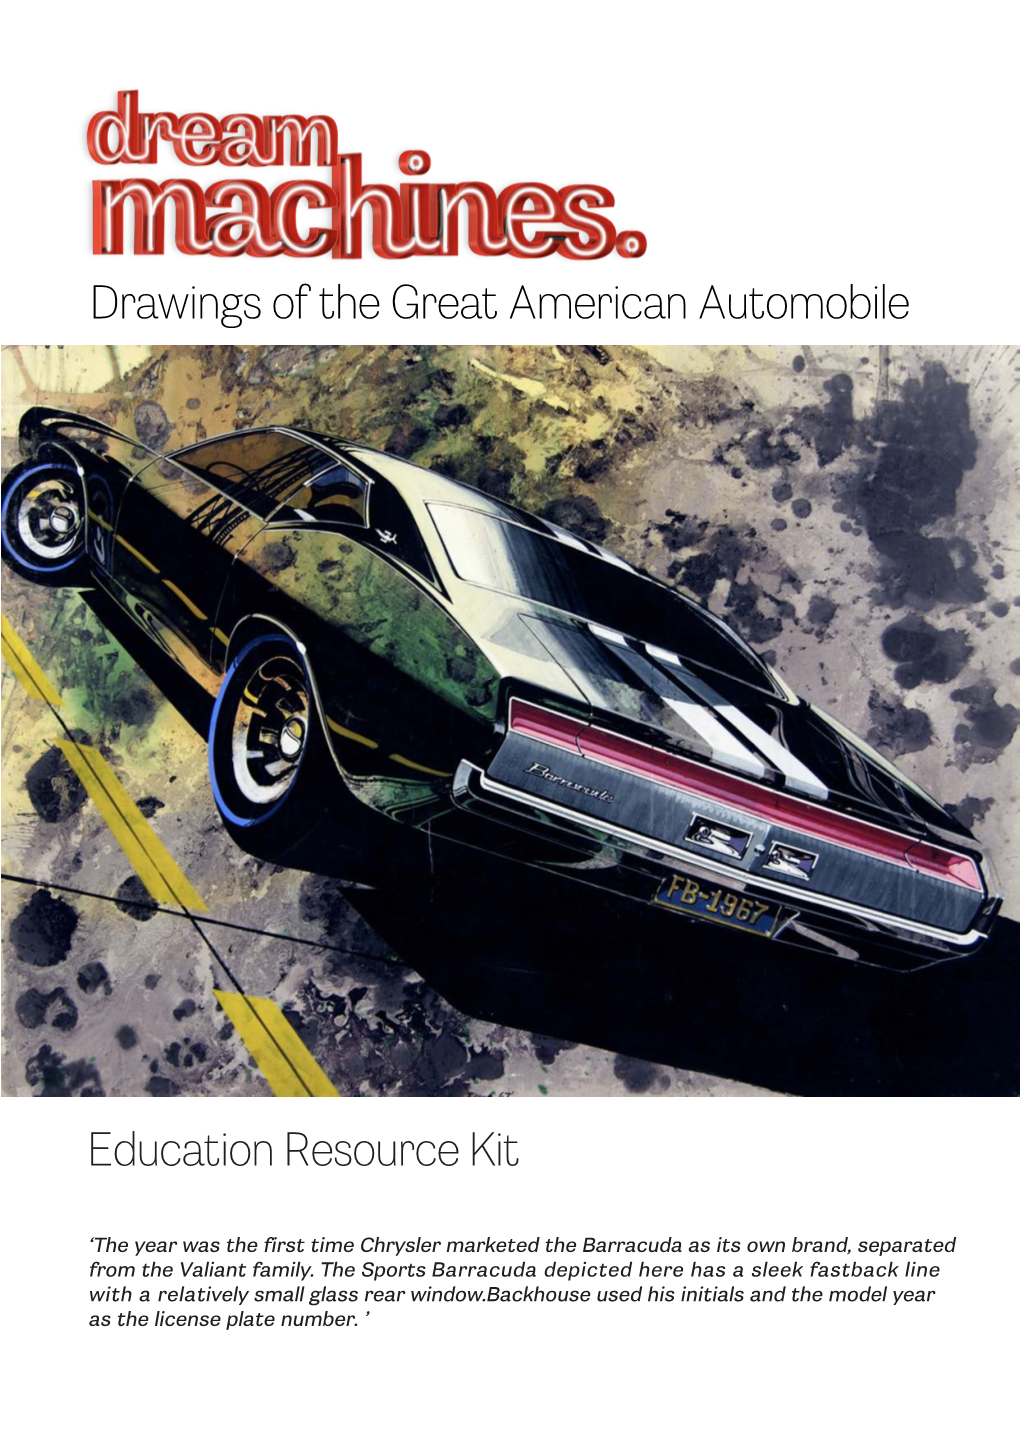 Education Resource Kit Drawings of the Great American Automobile